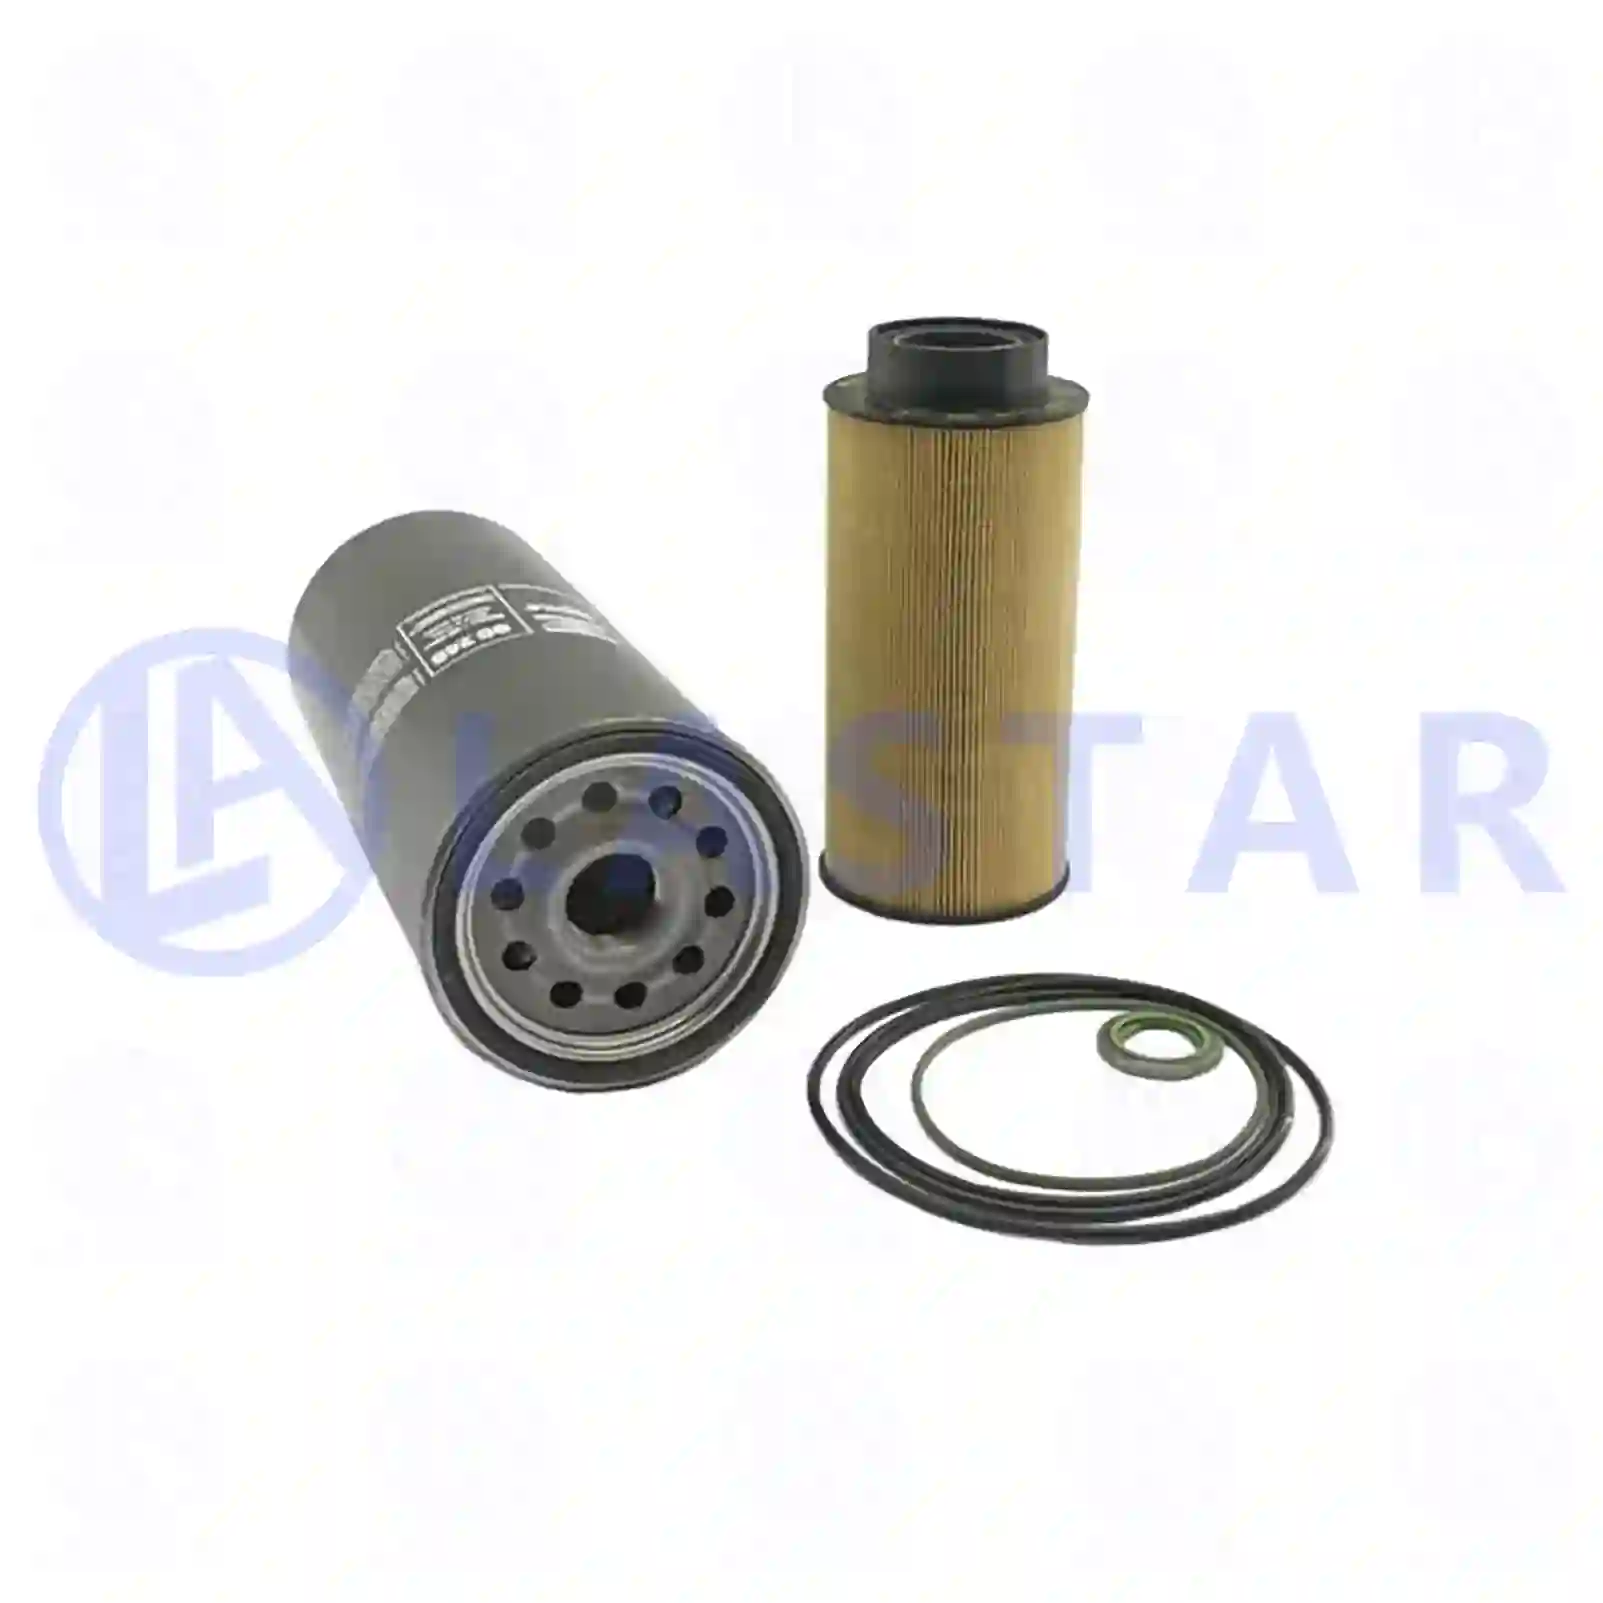 Service kit, filter - S, 77704377, 1732948, 1944127, 2189409, 560410 ||  77704377 Lastar Spare Part | Truck Spare Parts, Auotomotive Spare Parts Service kit, filter - S, 77704377, 1732948, 1944127, 2189409, 560410 ||  77704377 Lastar Spare Part | Truck Spare Parts, Auotomotive Spare Parts